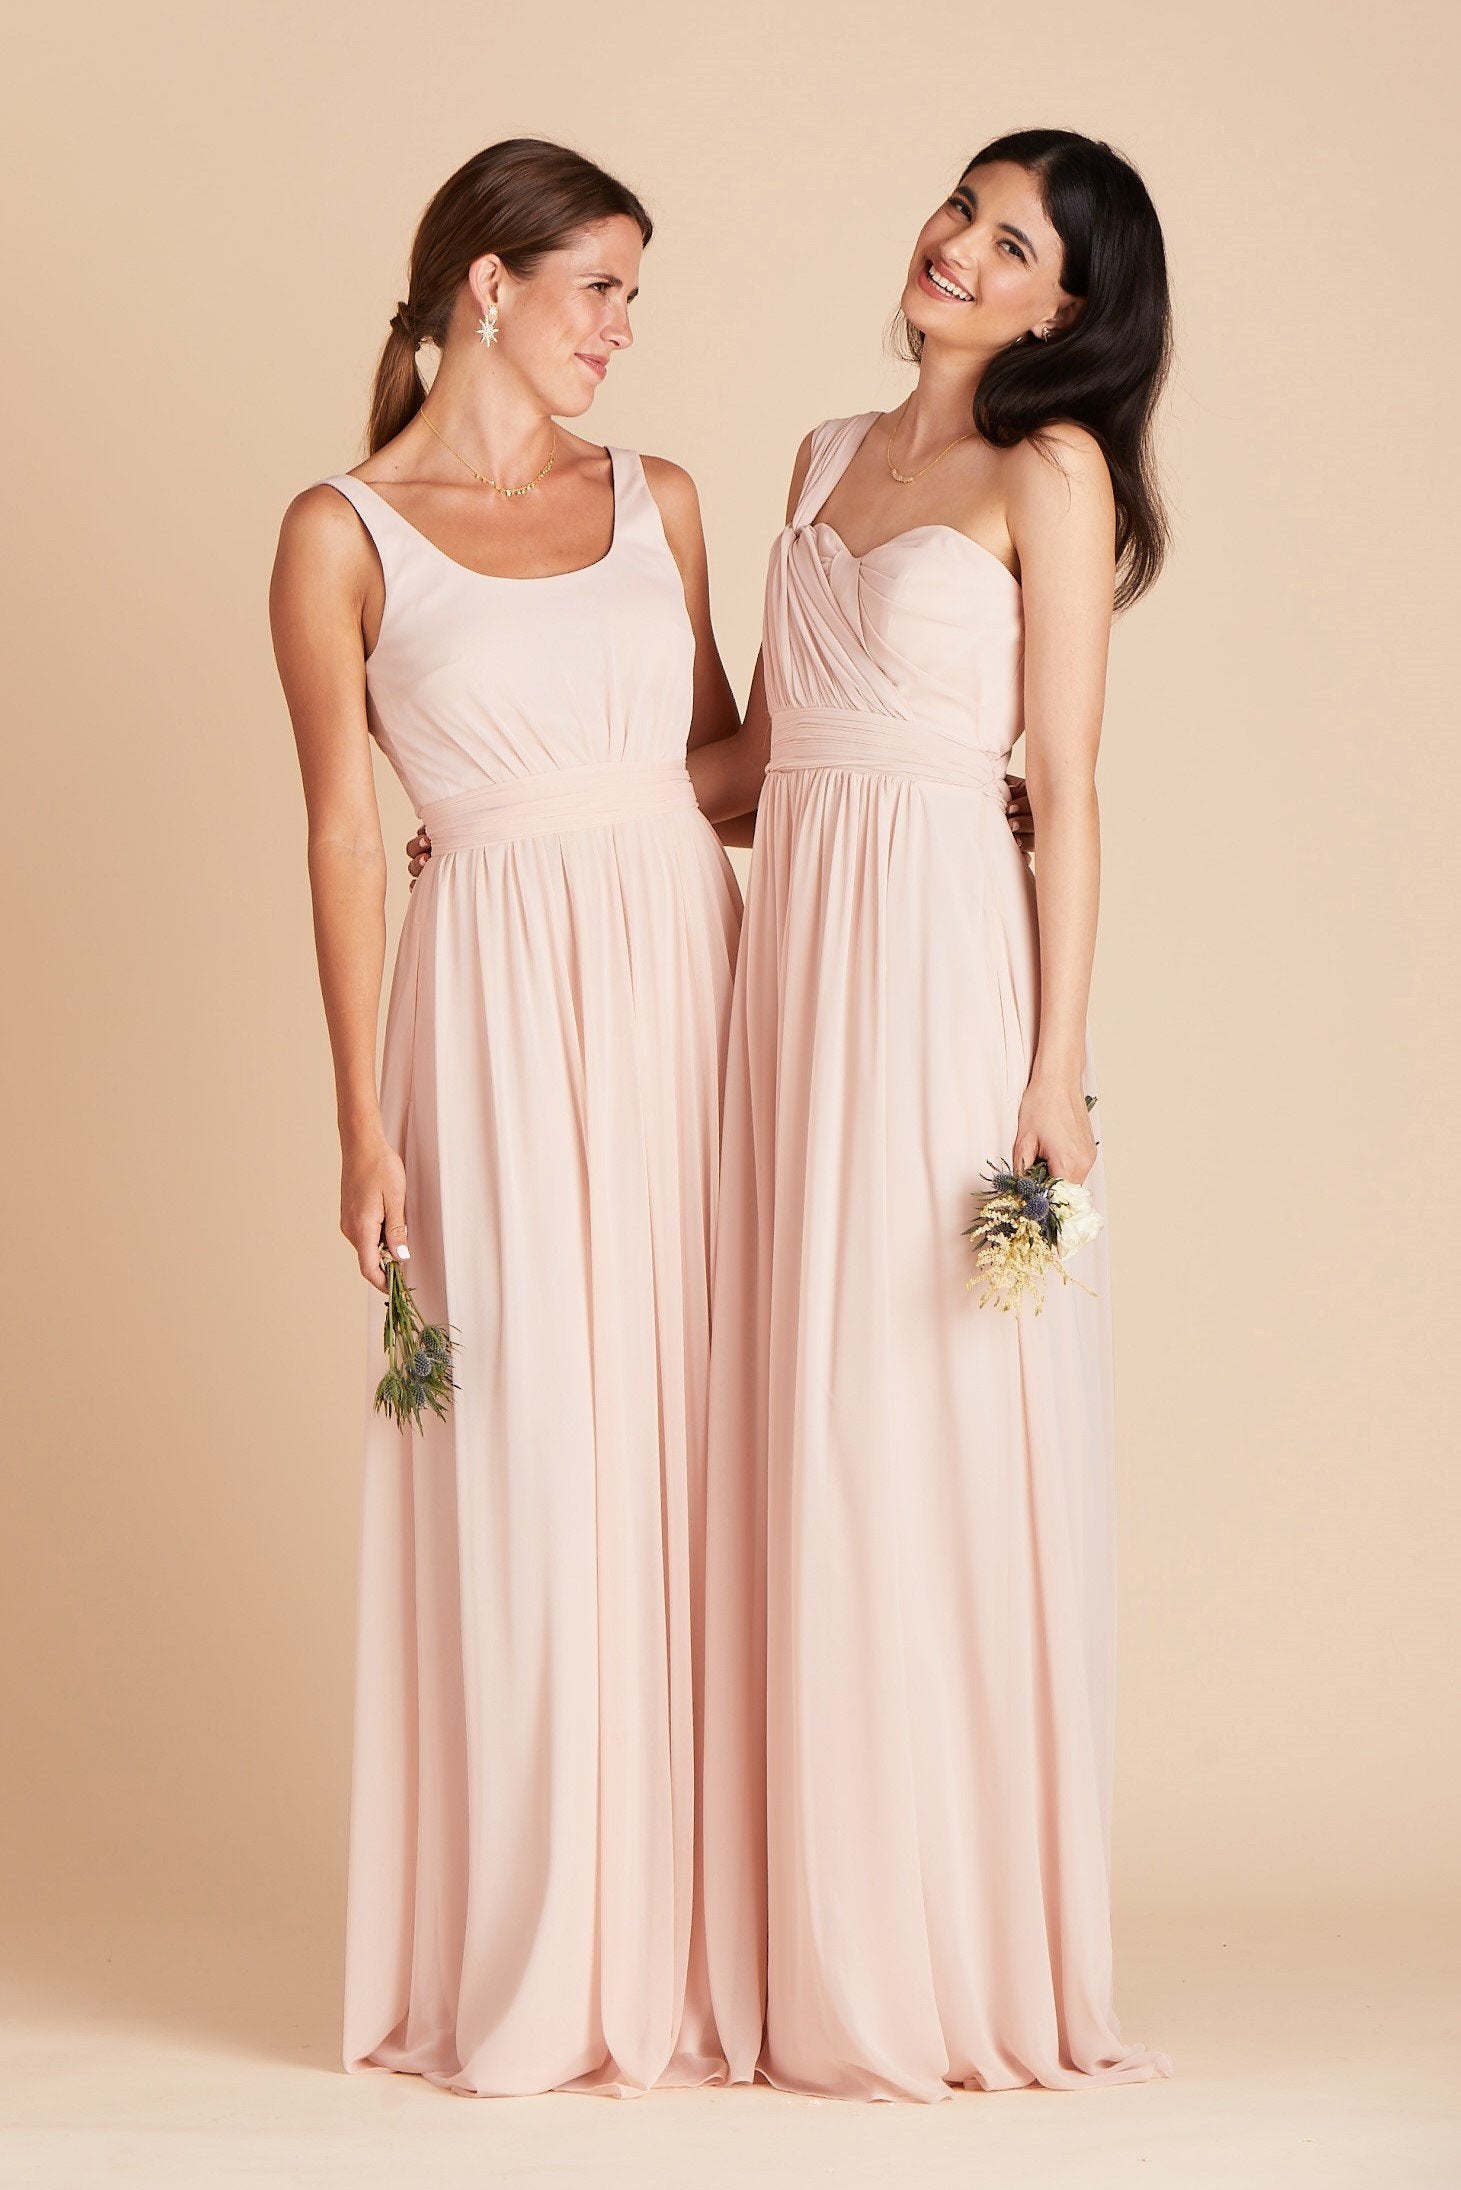 Grace convertible bridesmaid dress in pale blush pink chiffon by Birdy Grey, side view